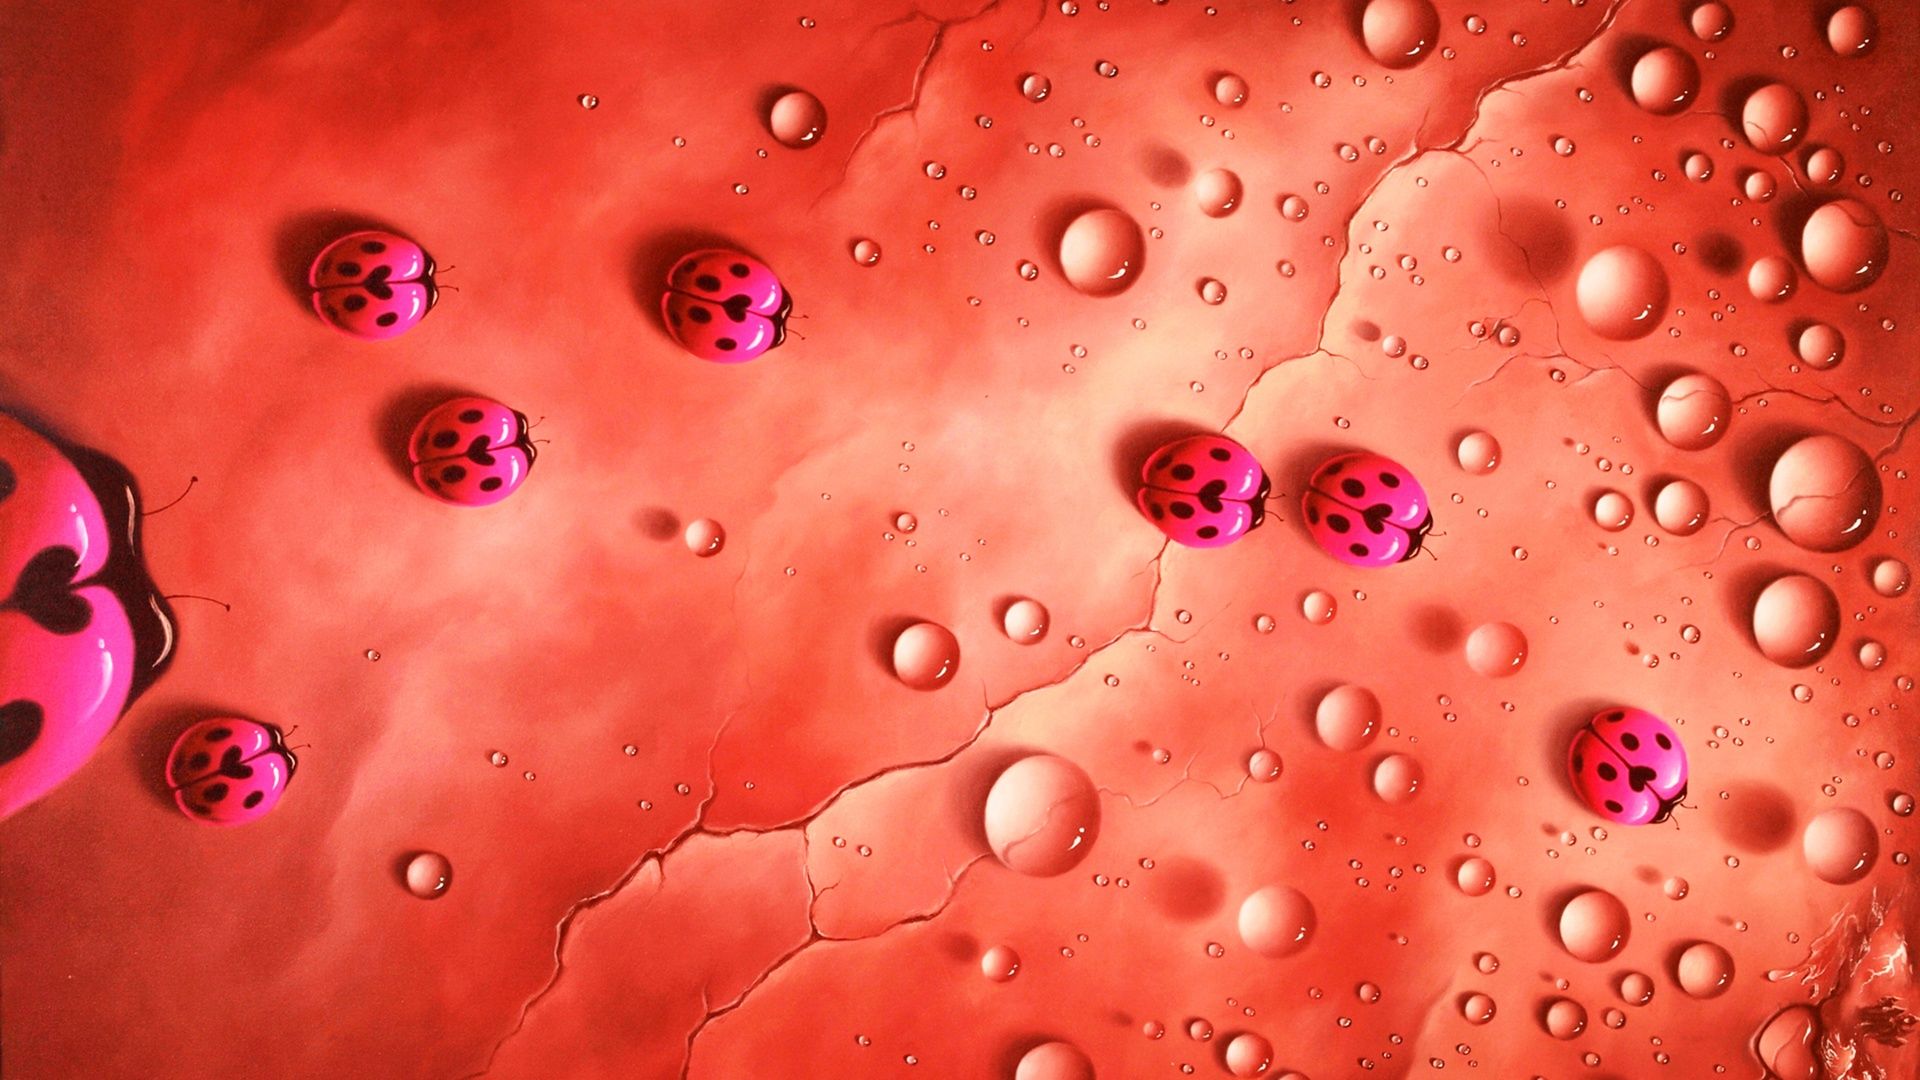 Wallpaper Creative design, water drops and ladybugs, red style 1920x1080 Full HD 2K Picture, Image